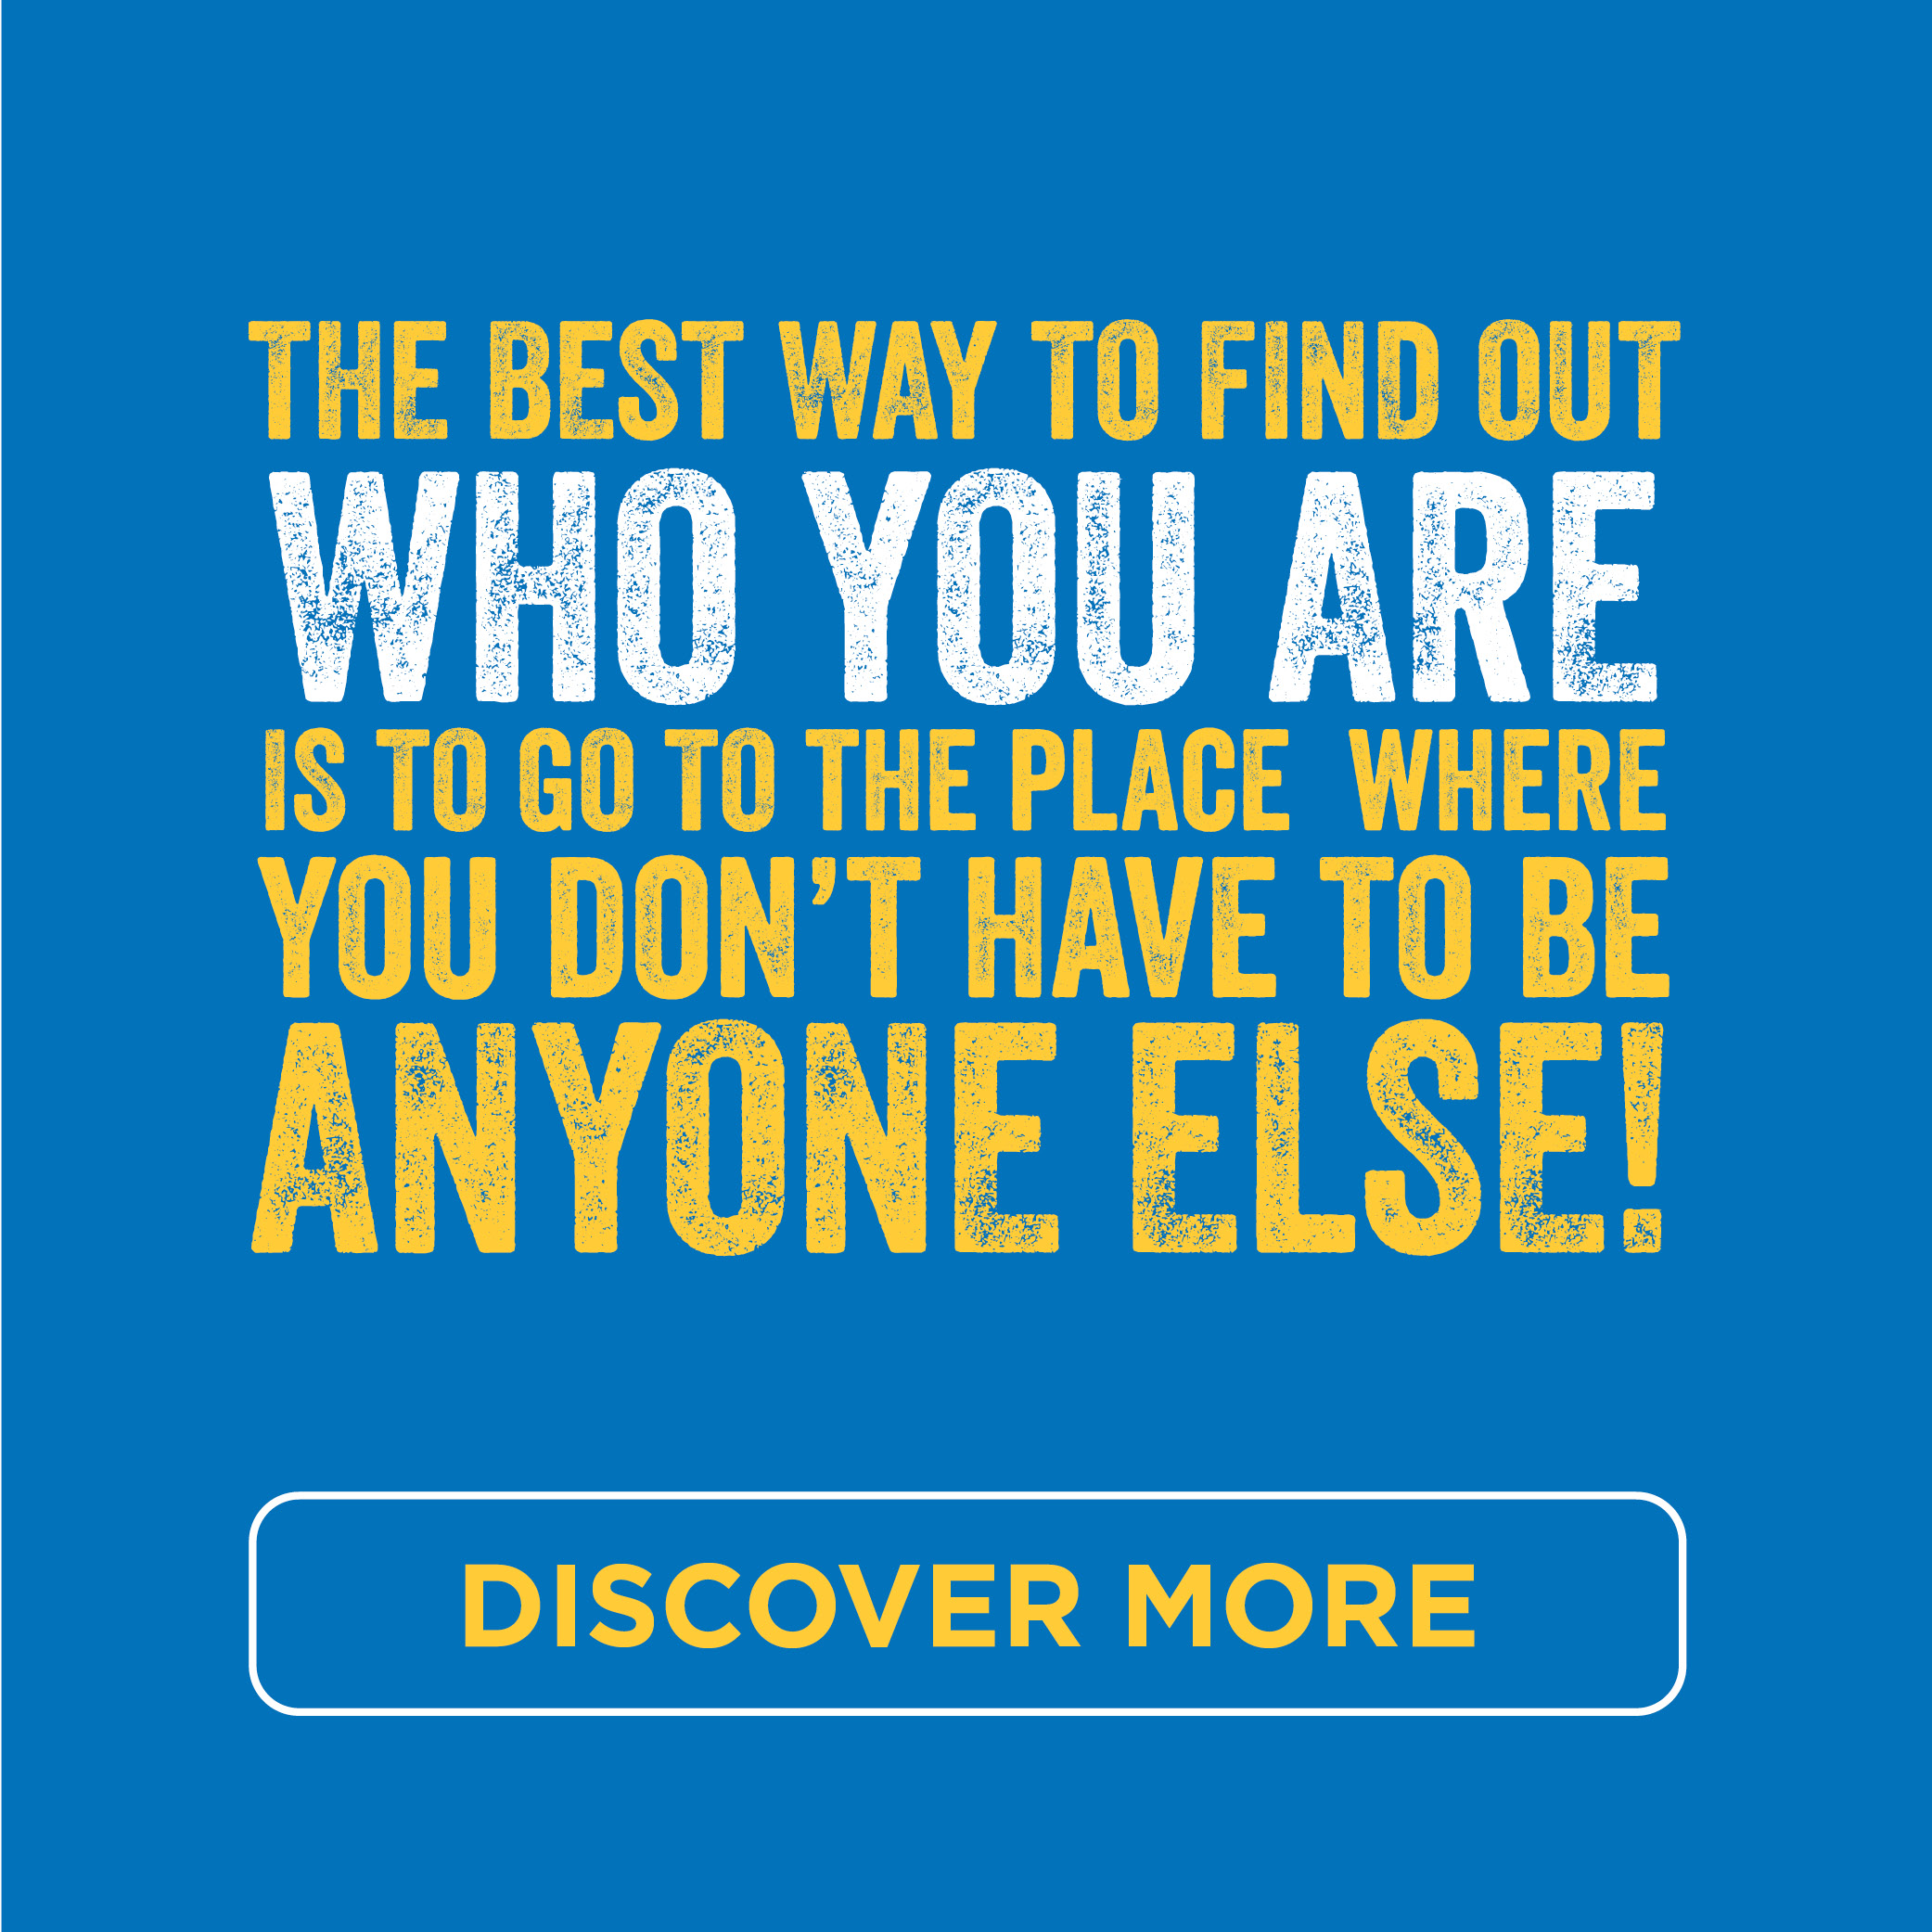 The best way to find out who you are is to go to the place where you don't have to be anyone else!